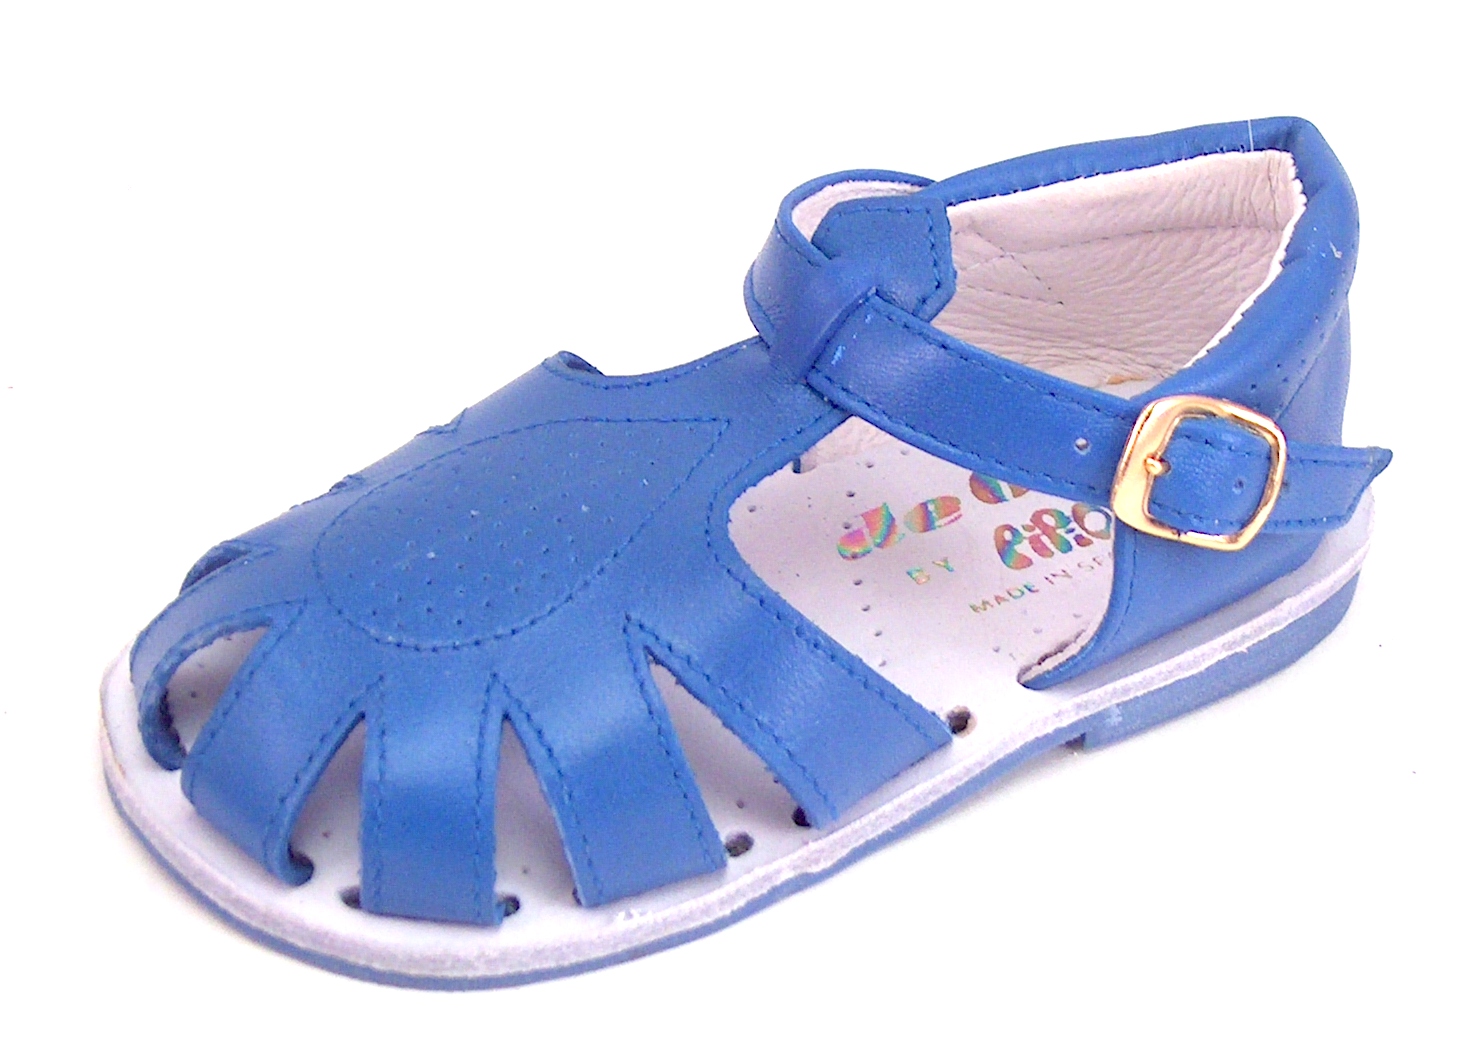 440 - Baby/Toddler Blue Leather Sandals